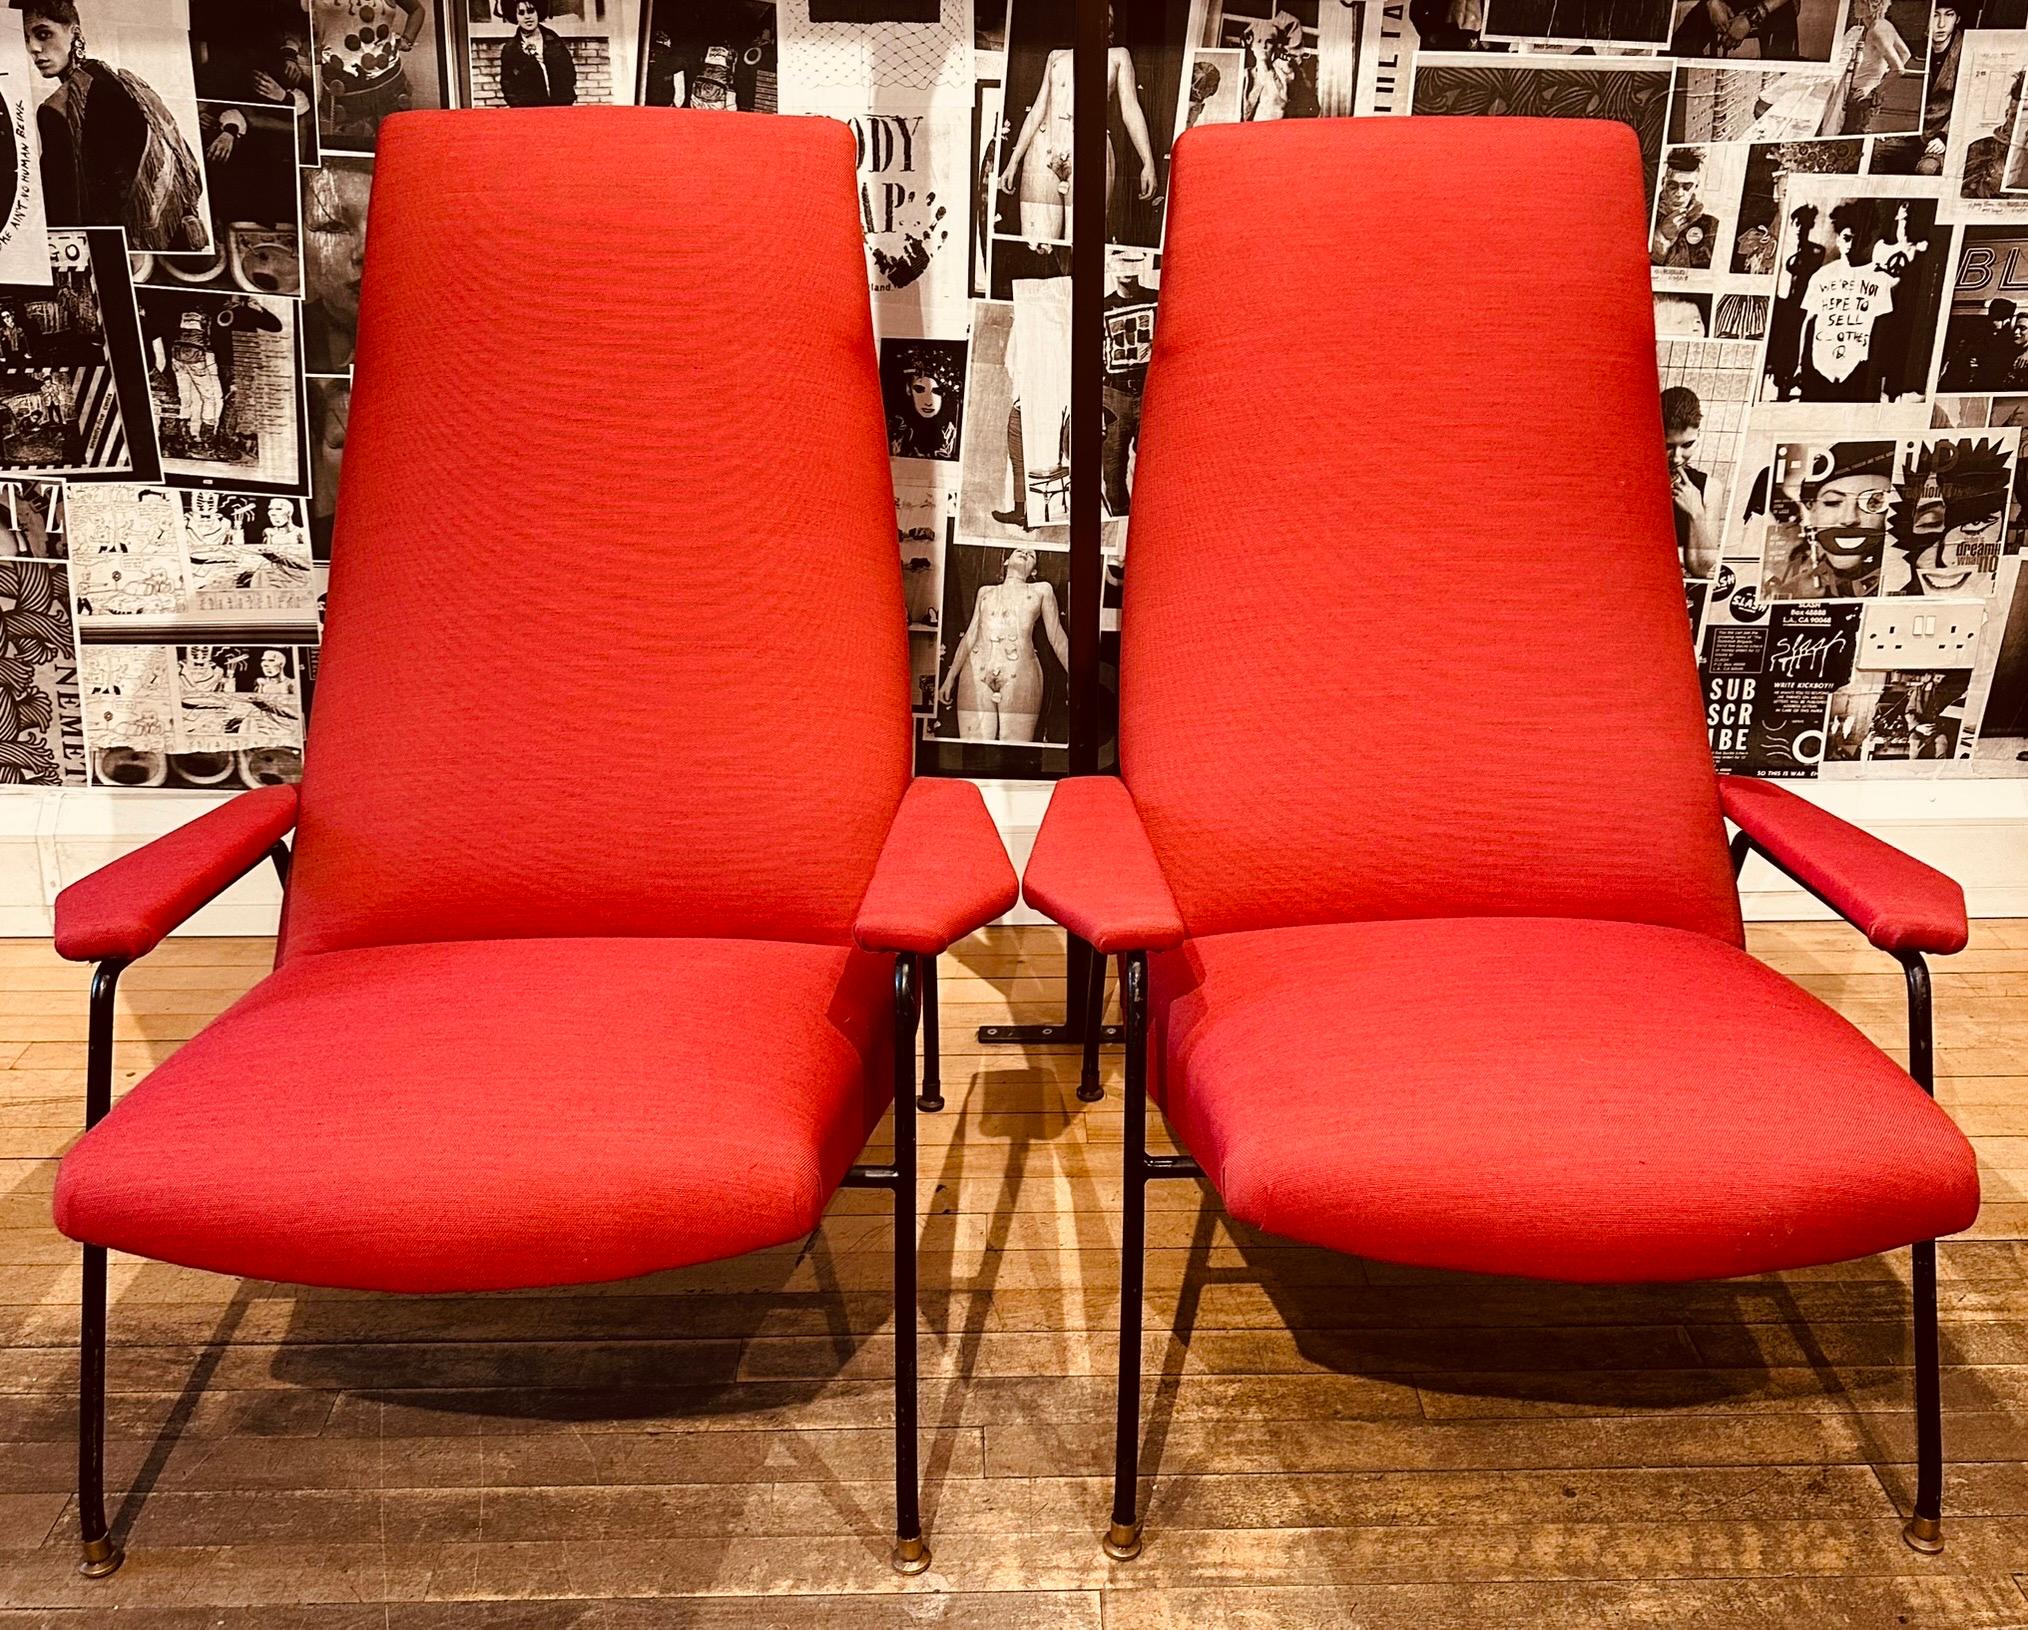 Pair of large and impressive 1950s Italian lounge chairs which are attributed to a design by Augusto Bozzi for Saporiti Italia.  The chairs have been upholstered in a red textured fabric and feature Bozzi's renowned black-painted steel frame with